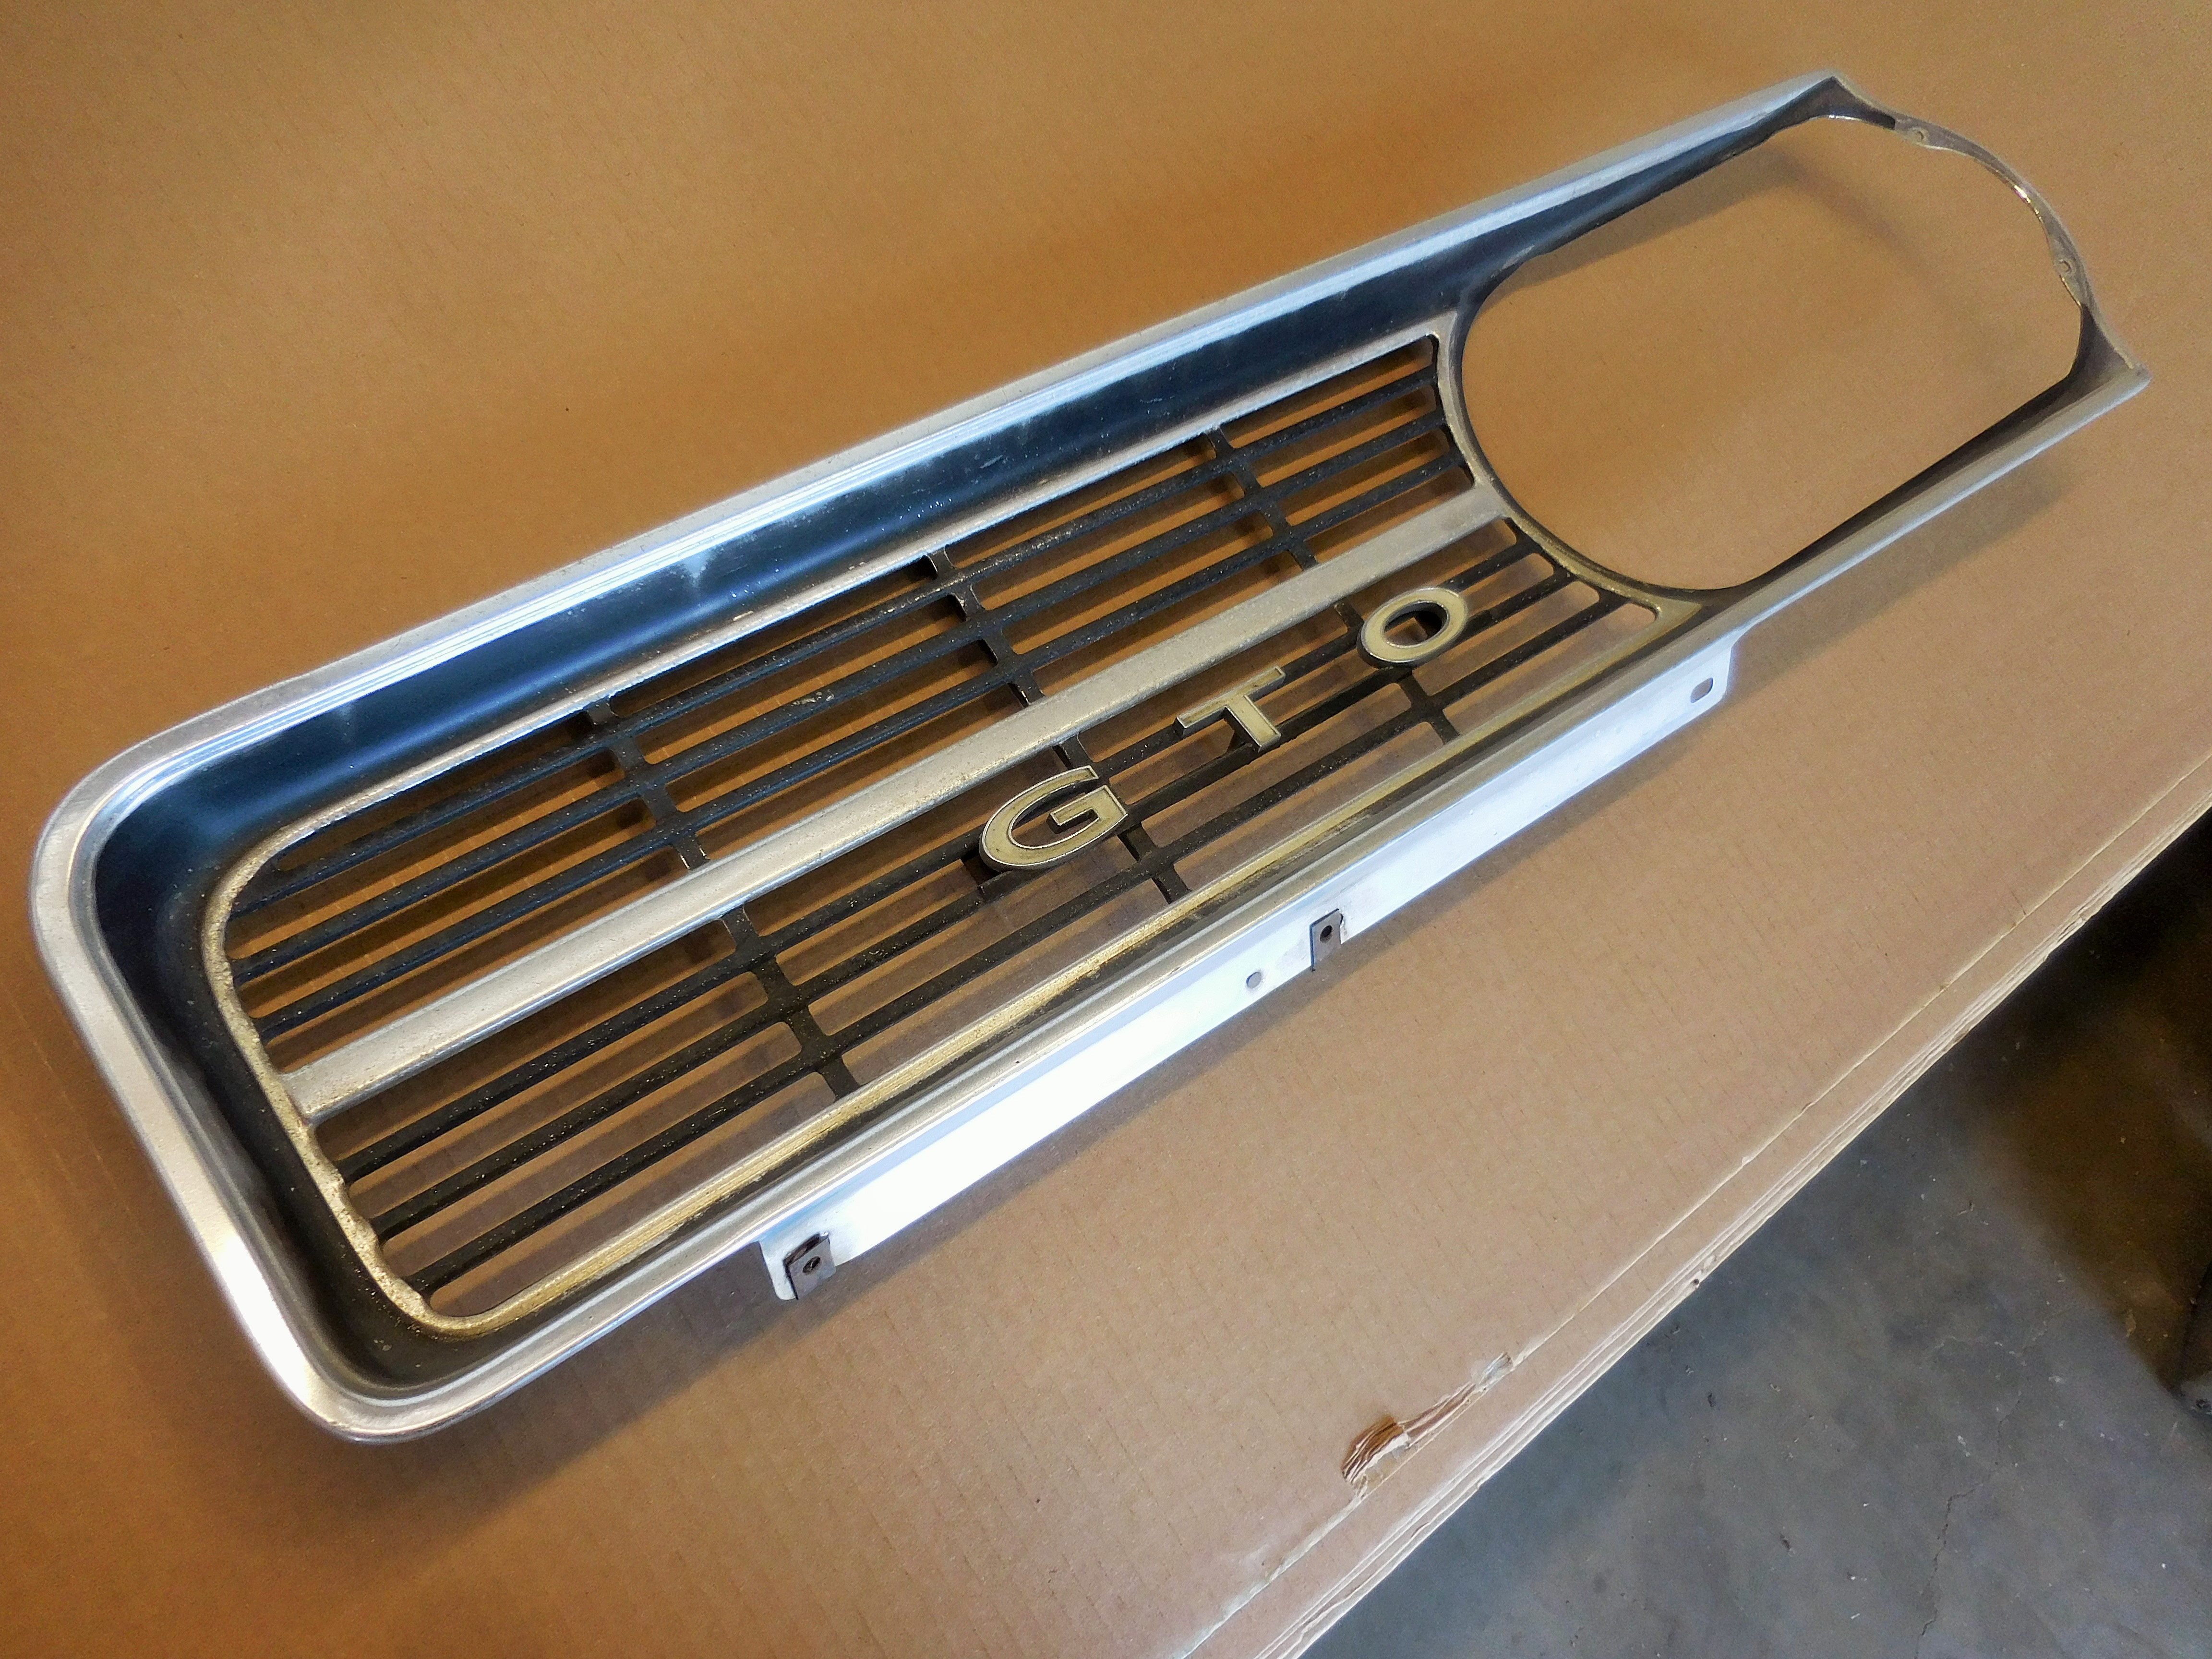 1964, Pontiac, GTO, Lemans, left,right, grill, grills, grille,